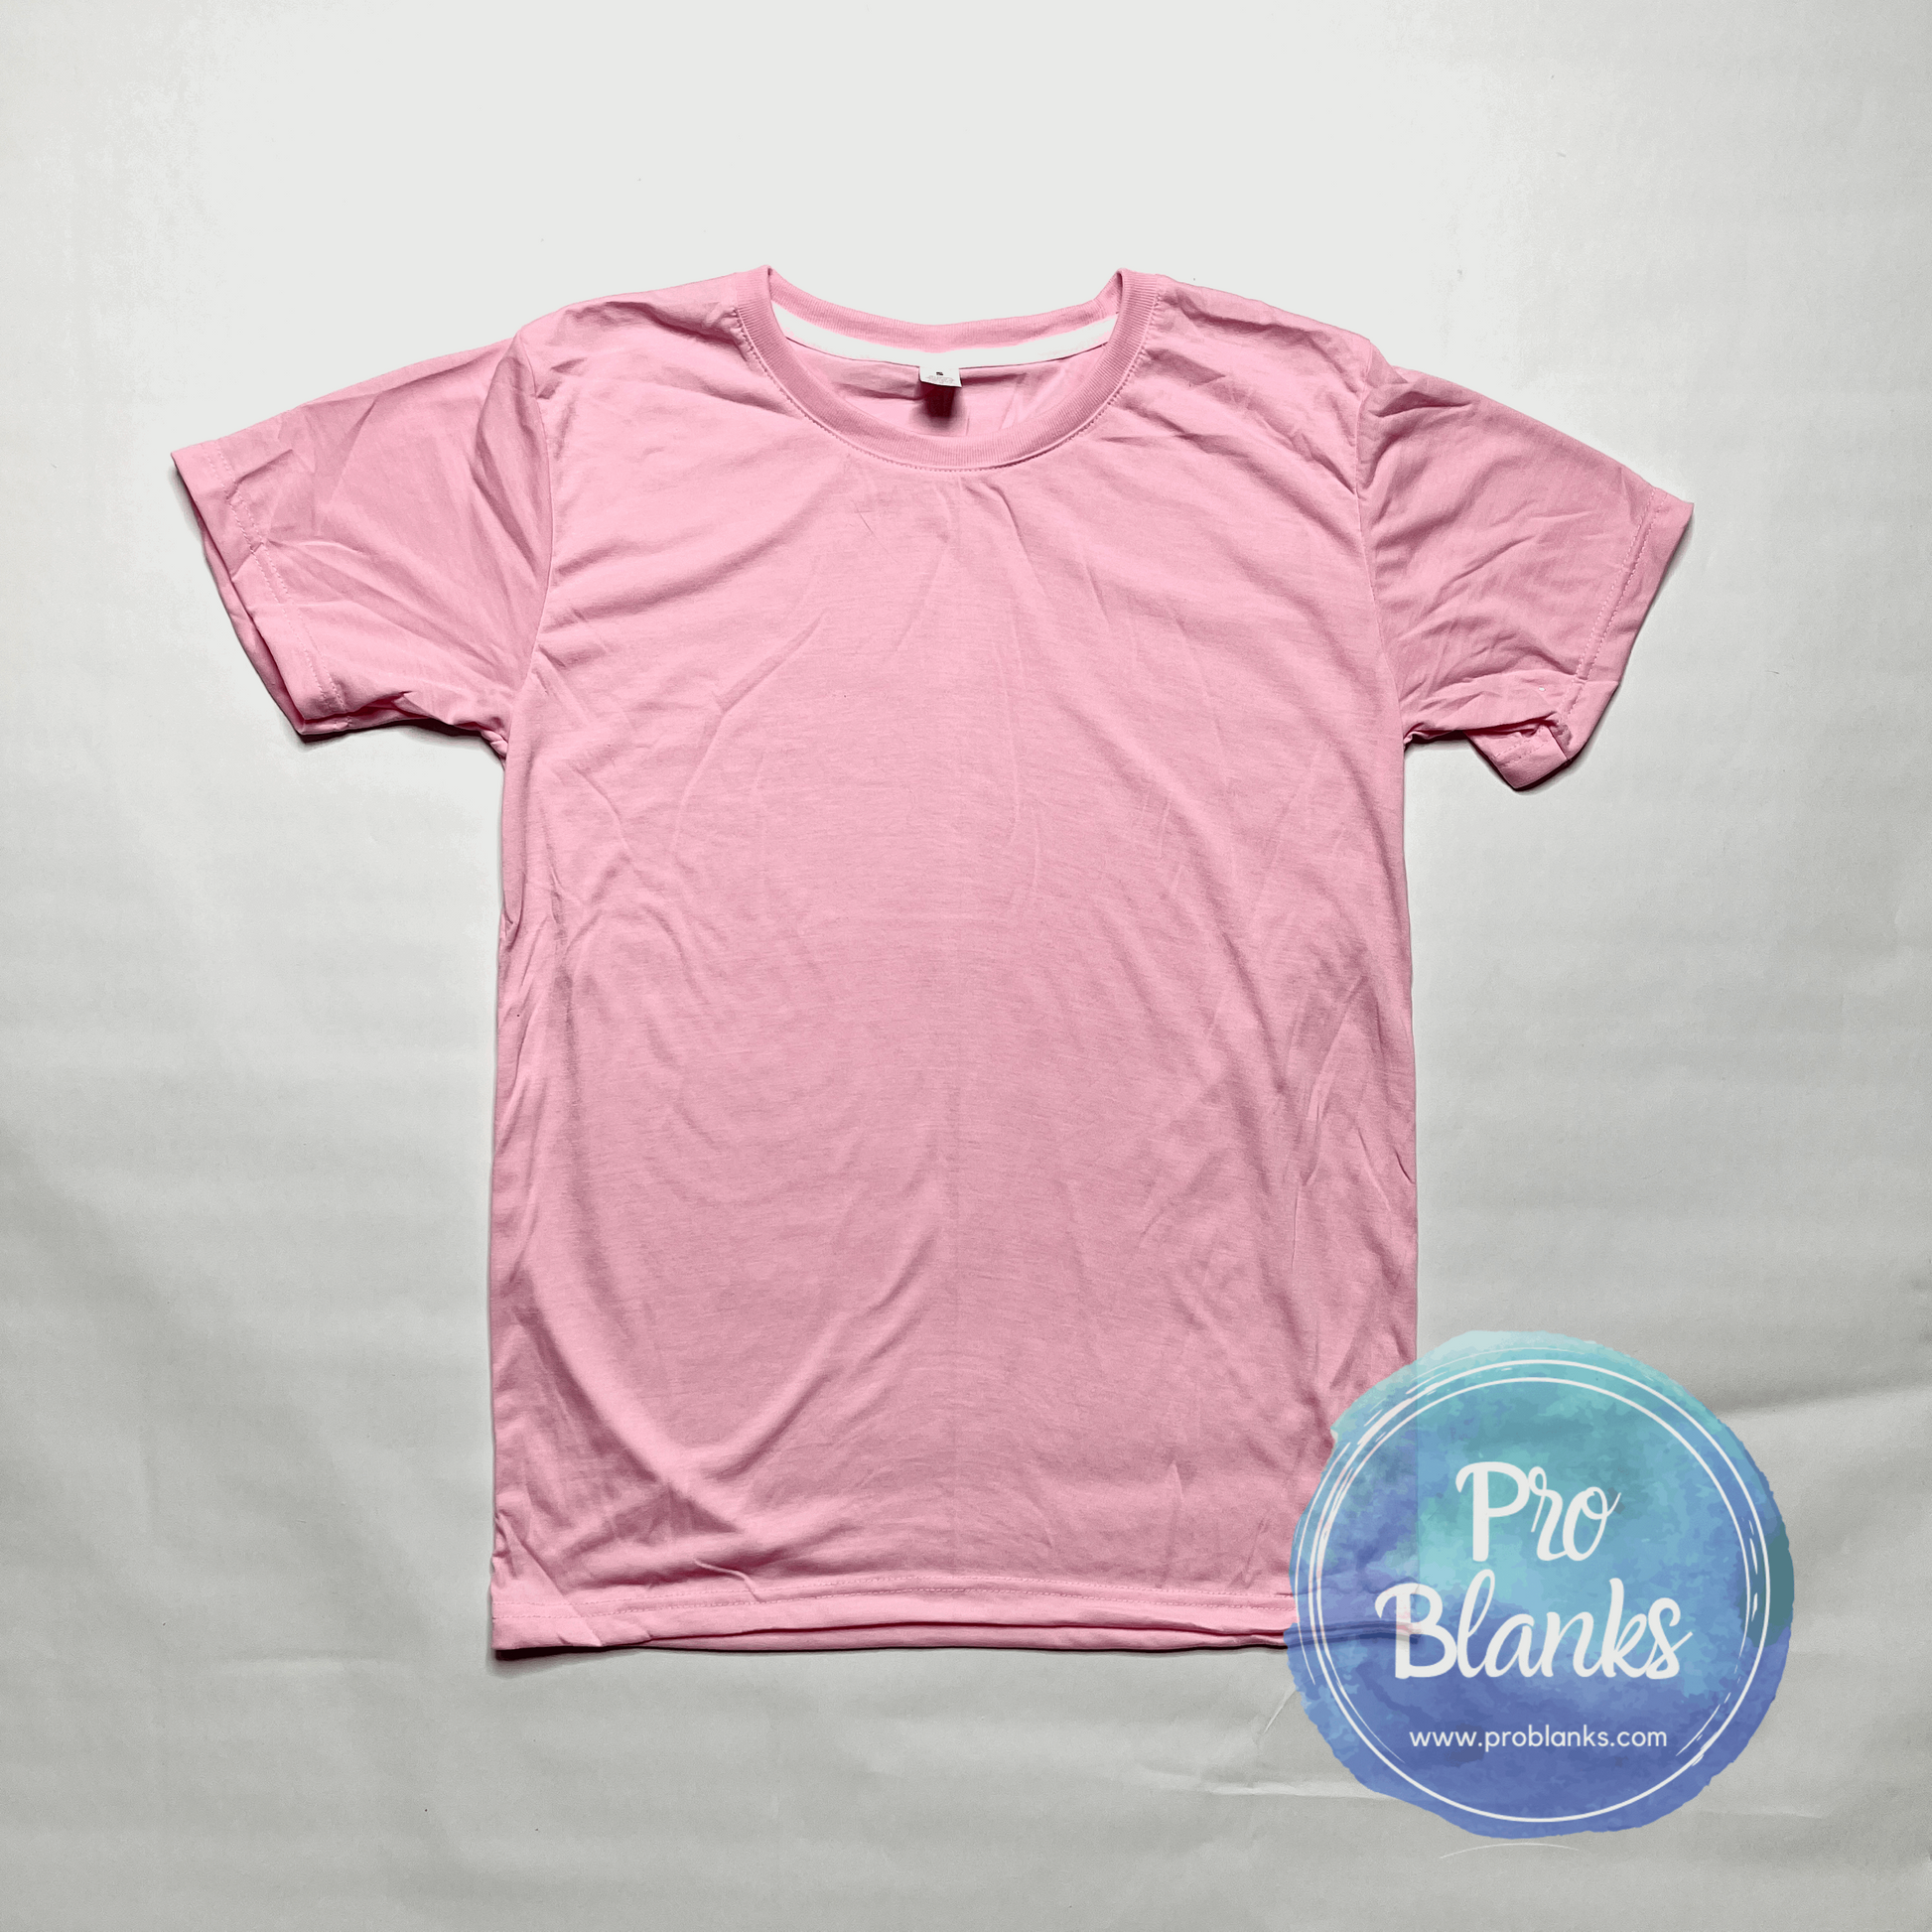 CLEARANCE - RTS -  100% Polyester Unbranded Tee (Thinner Fabric) - Pro Blanks